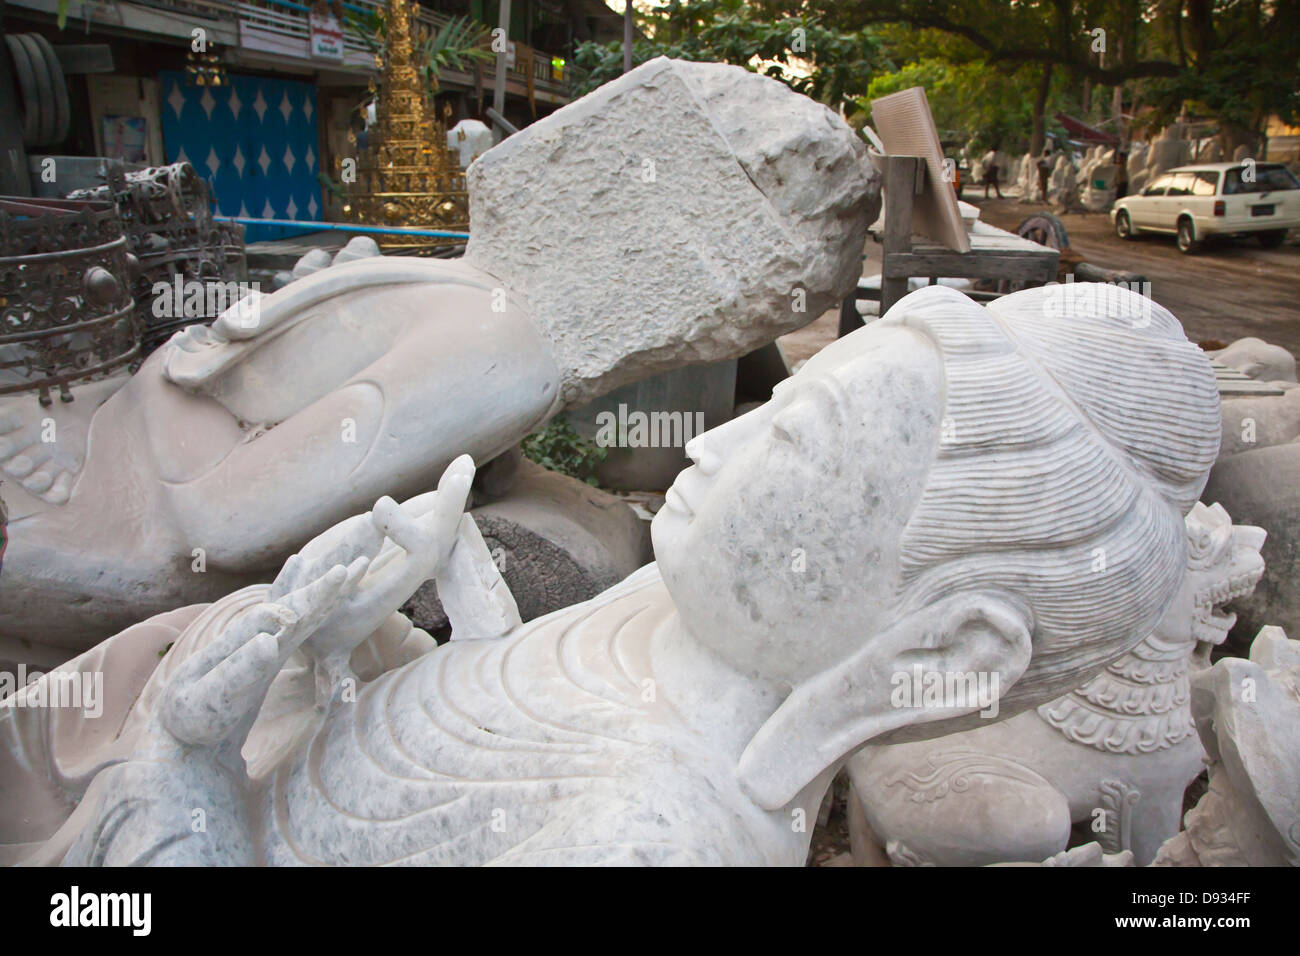 The carving of BUDDHA images is a living art in MANDALAY - MYANMAR Stock Photo